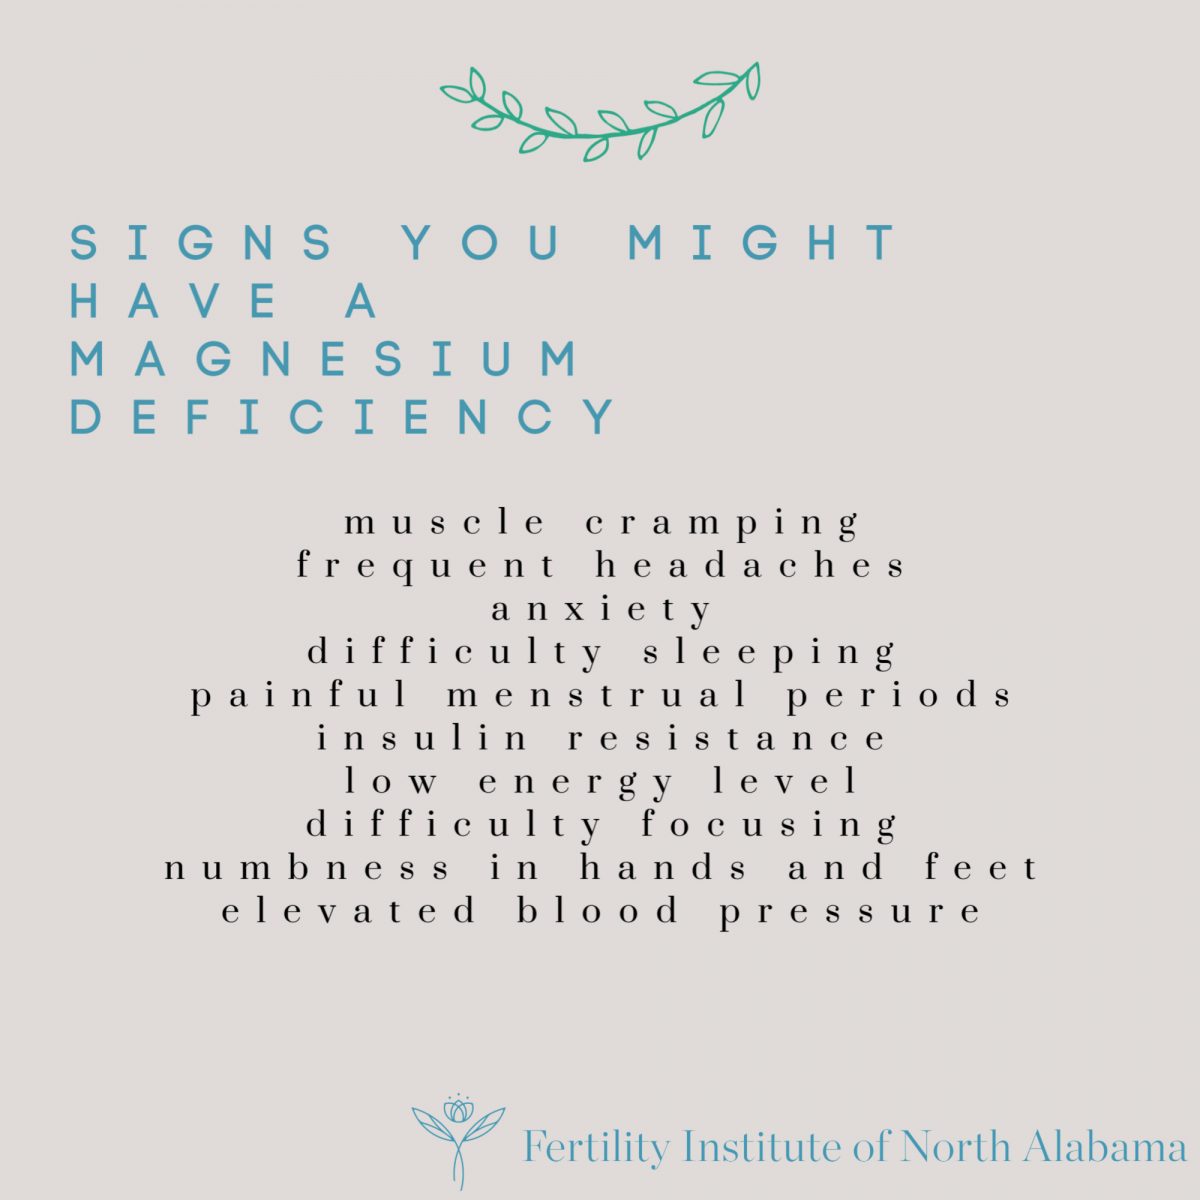 Signs of a Magnesium Deficiency